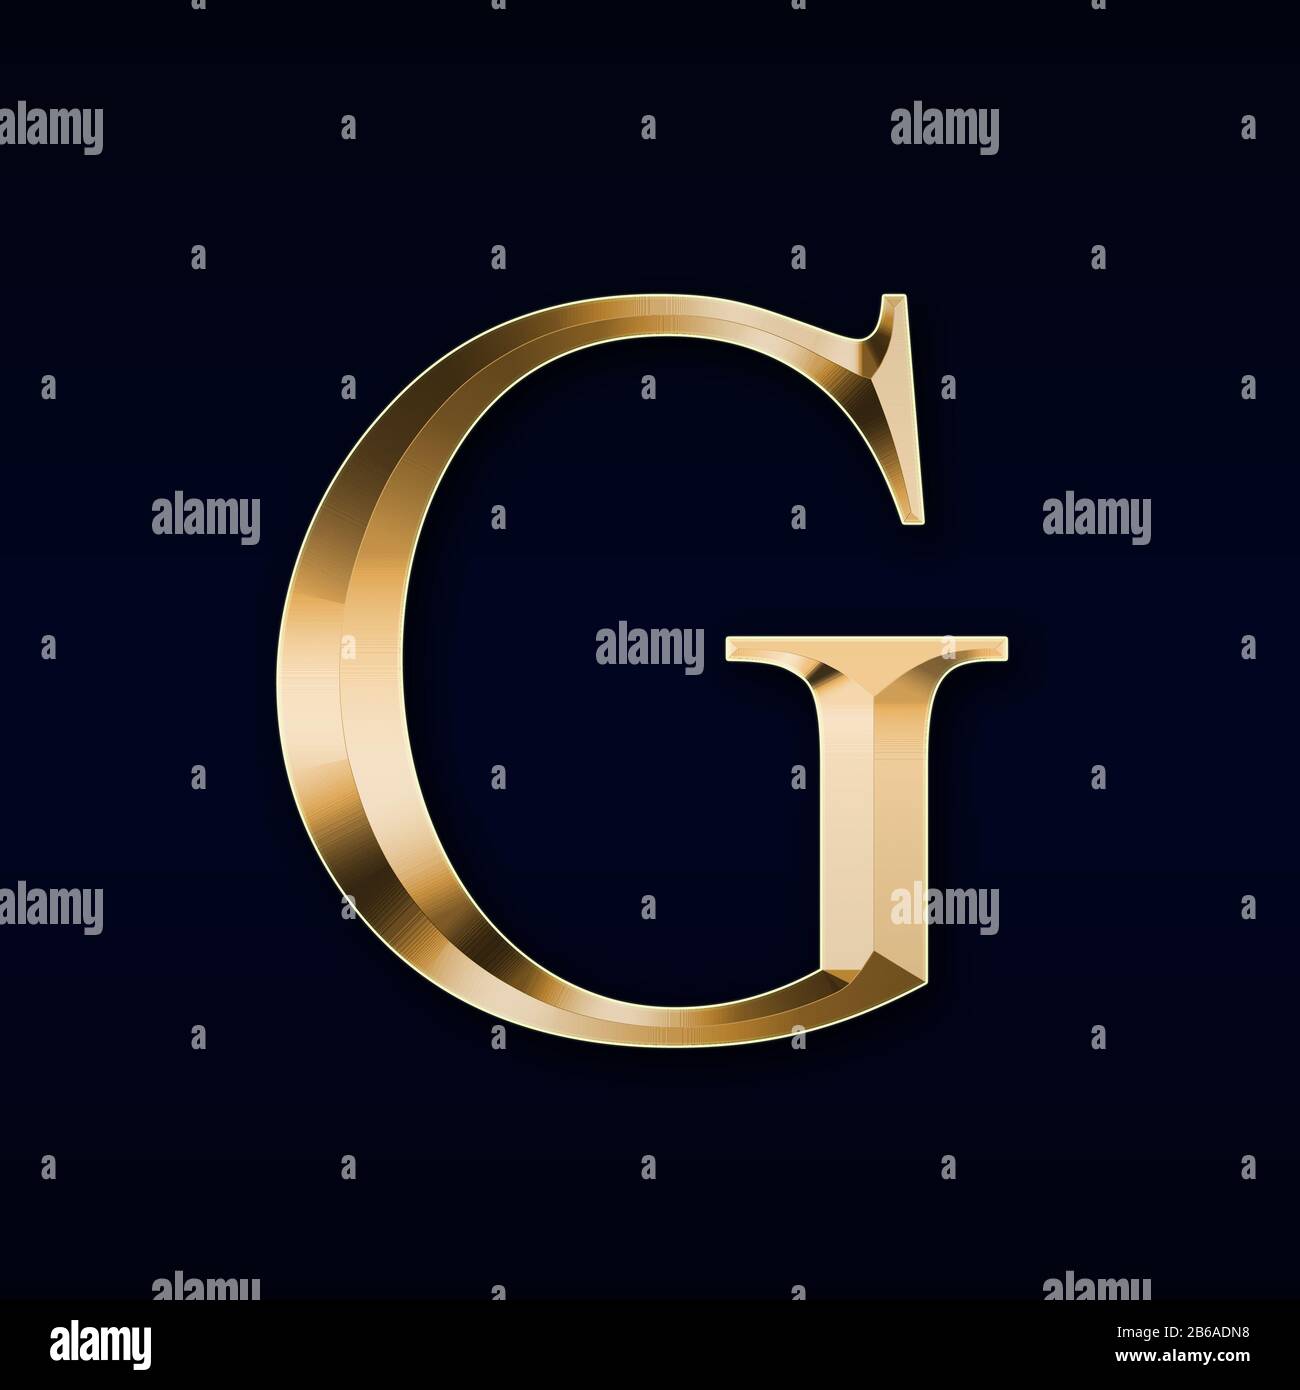 Gold letter 'G' on a black  background Stock Photo